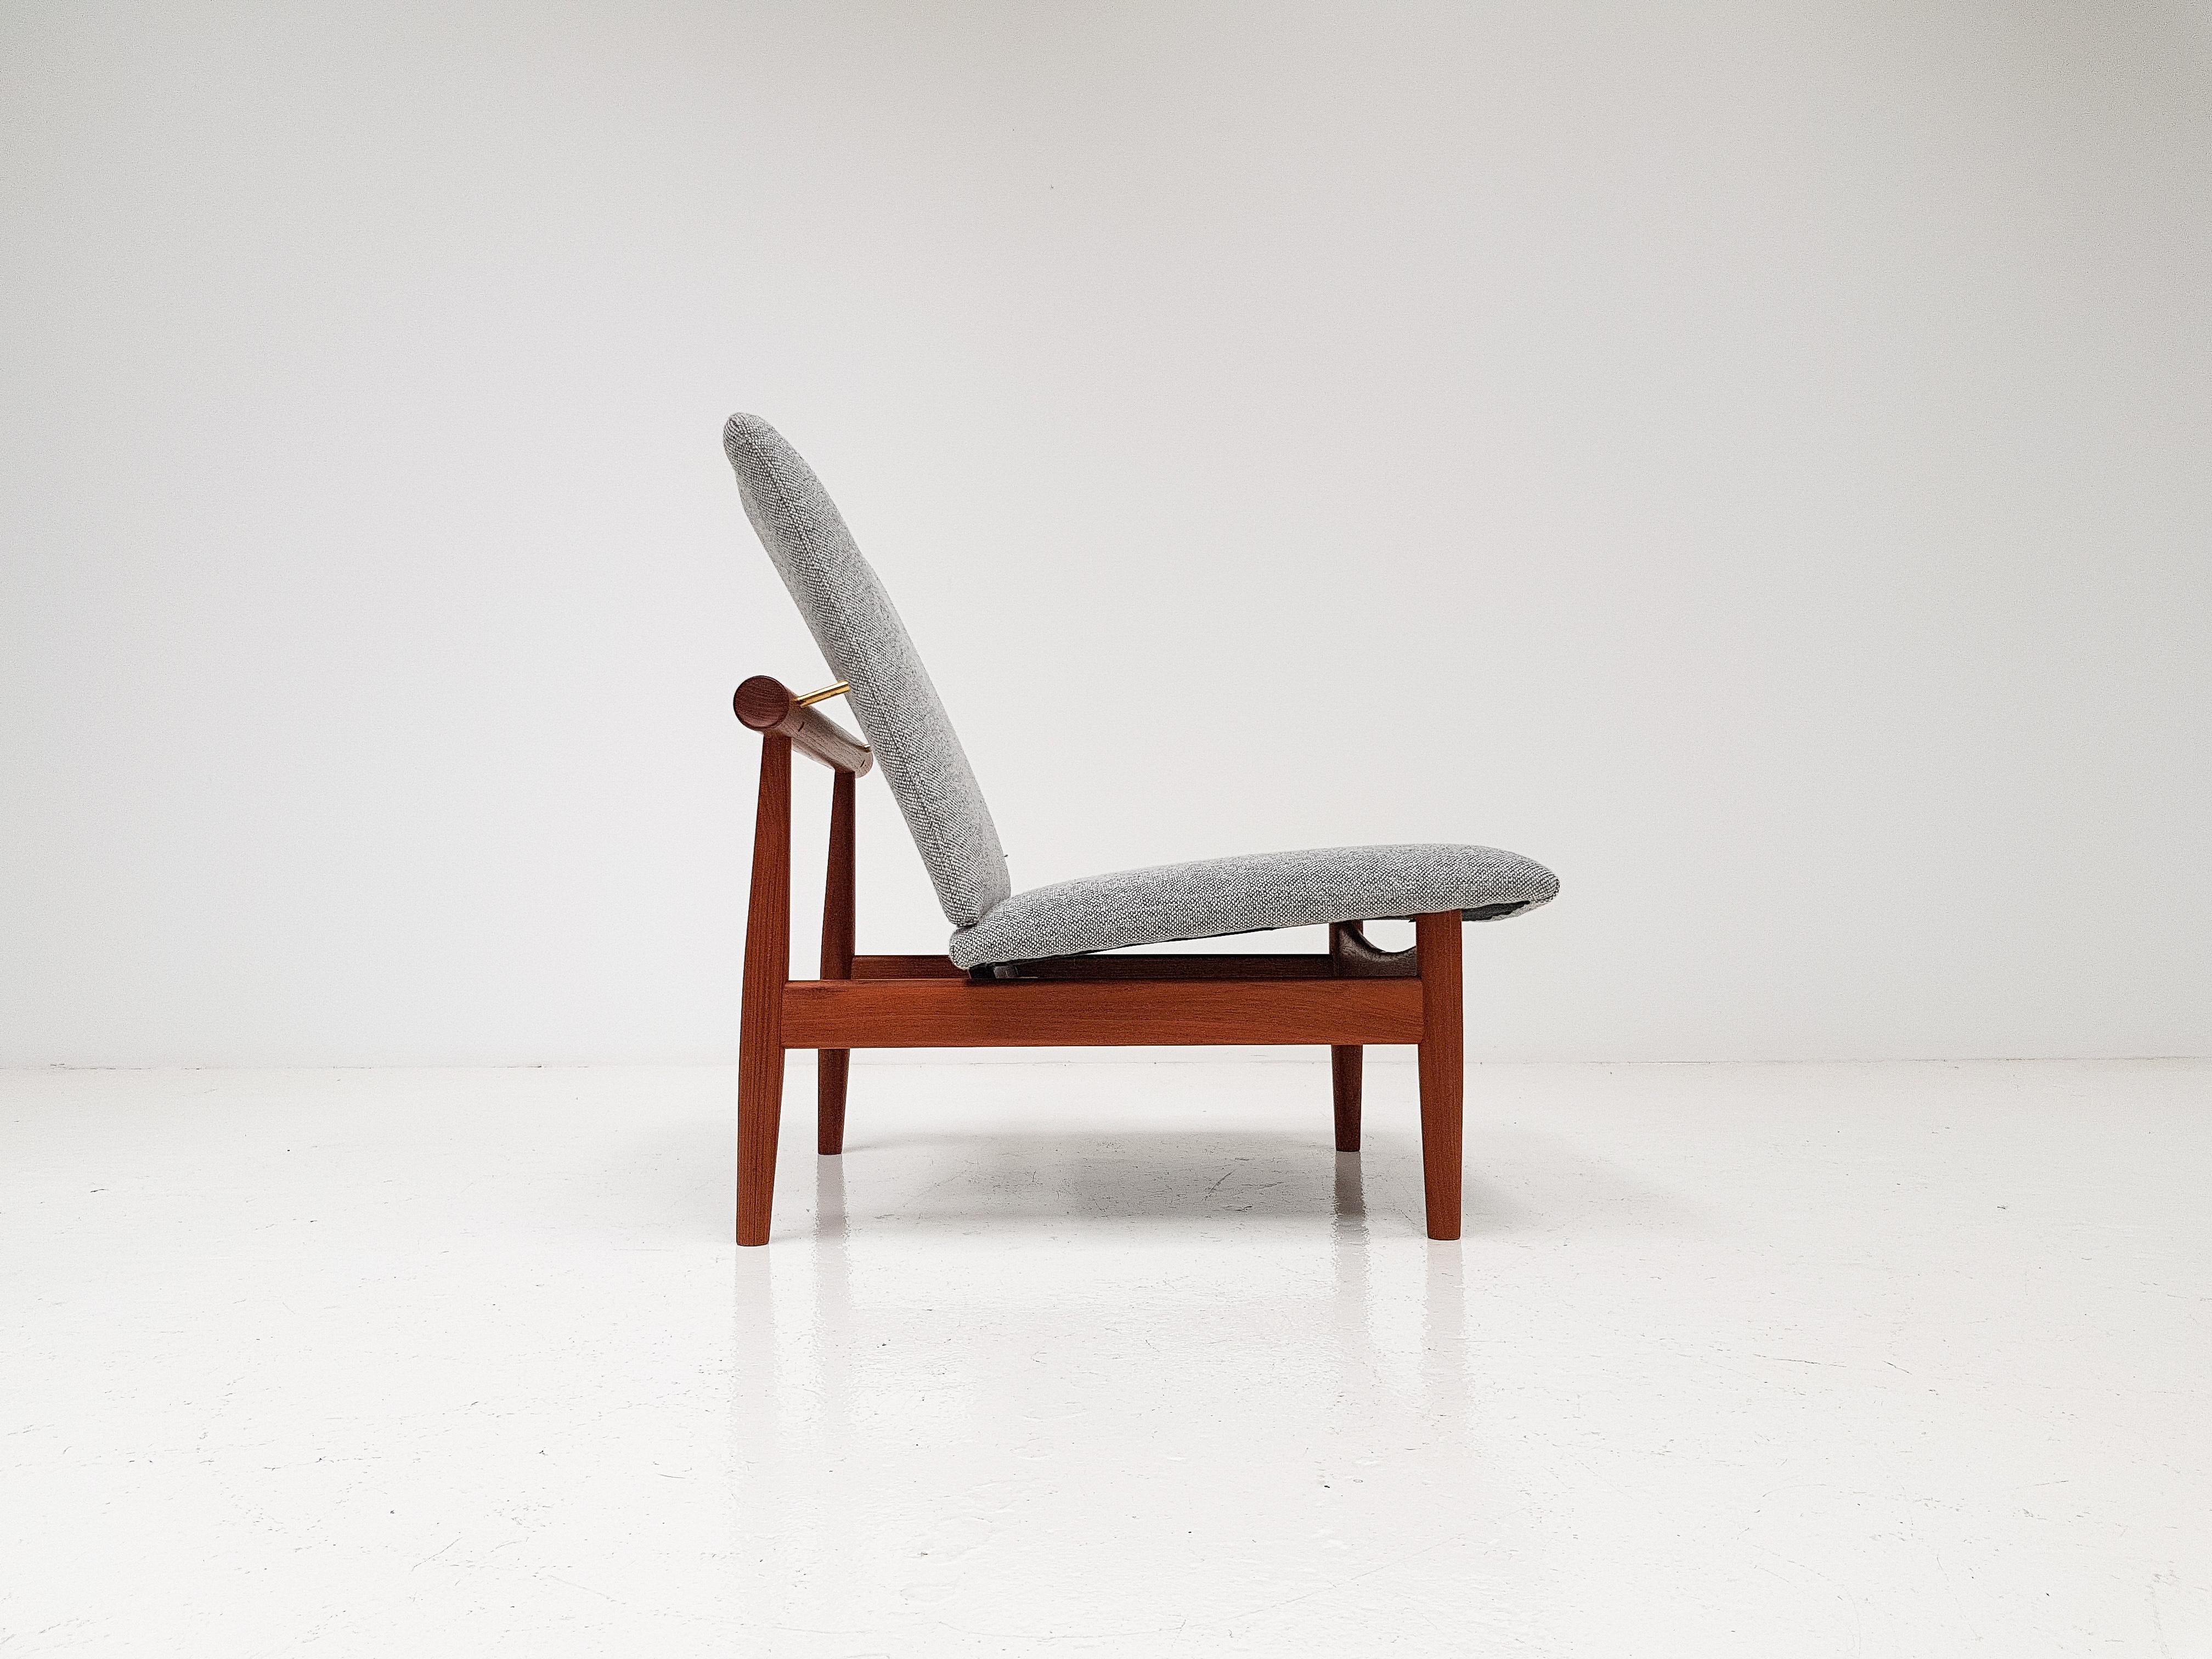 A Model 137 lounge chair by Danish icon Finn Juhl for France and Son, also called the Japan chair as inspiration was taken from the Miyajima water gate in Hatsukaichi, Hiroshima.

A beautiful design which is one of Finn Juhl's most sought